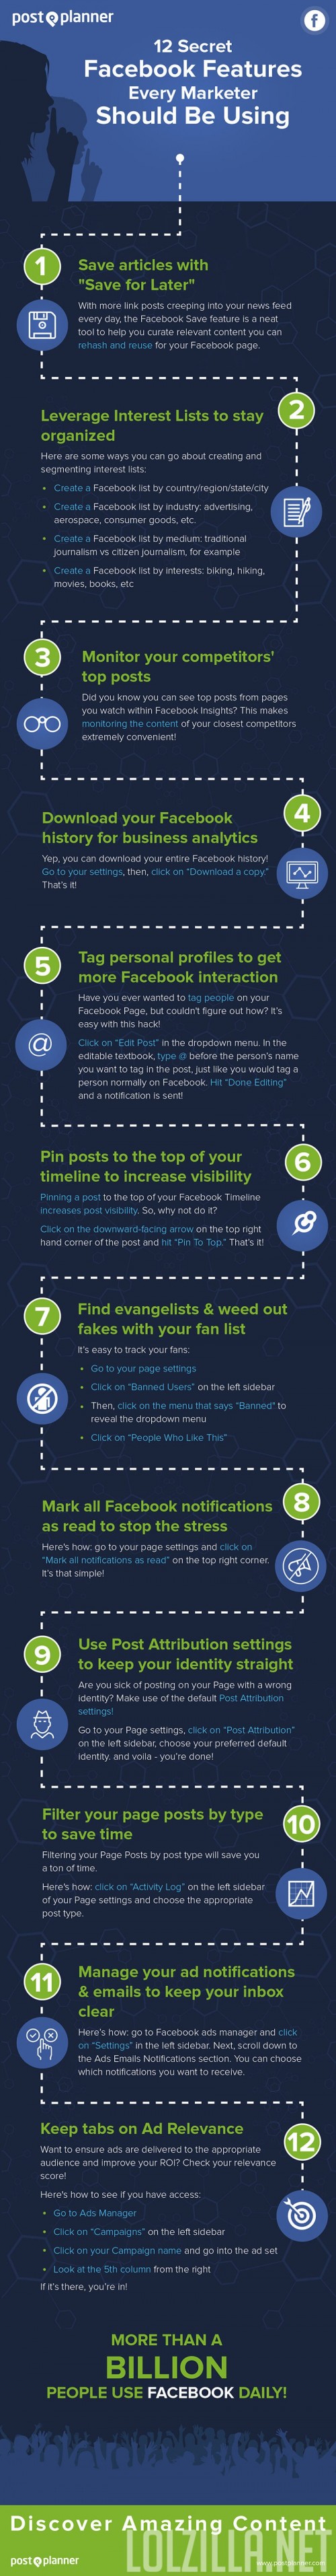 12_Secret_Facebook_Features_Every_Marketer_Should_Be_Using.jpg